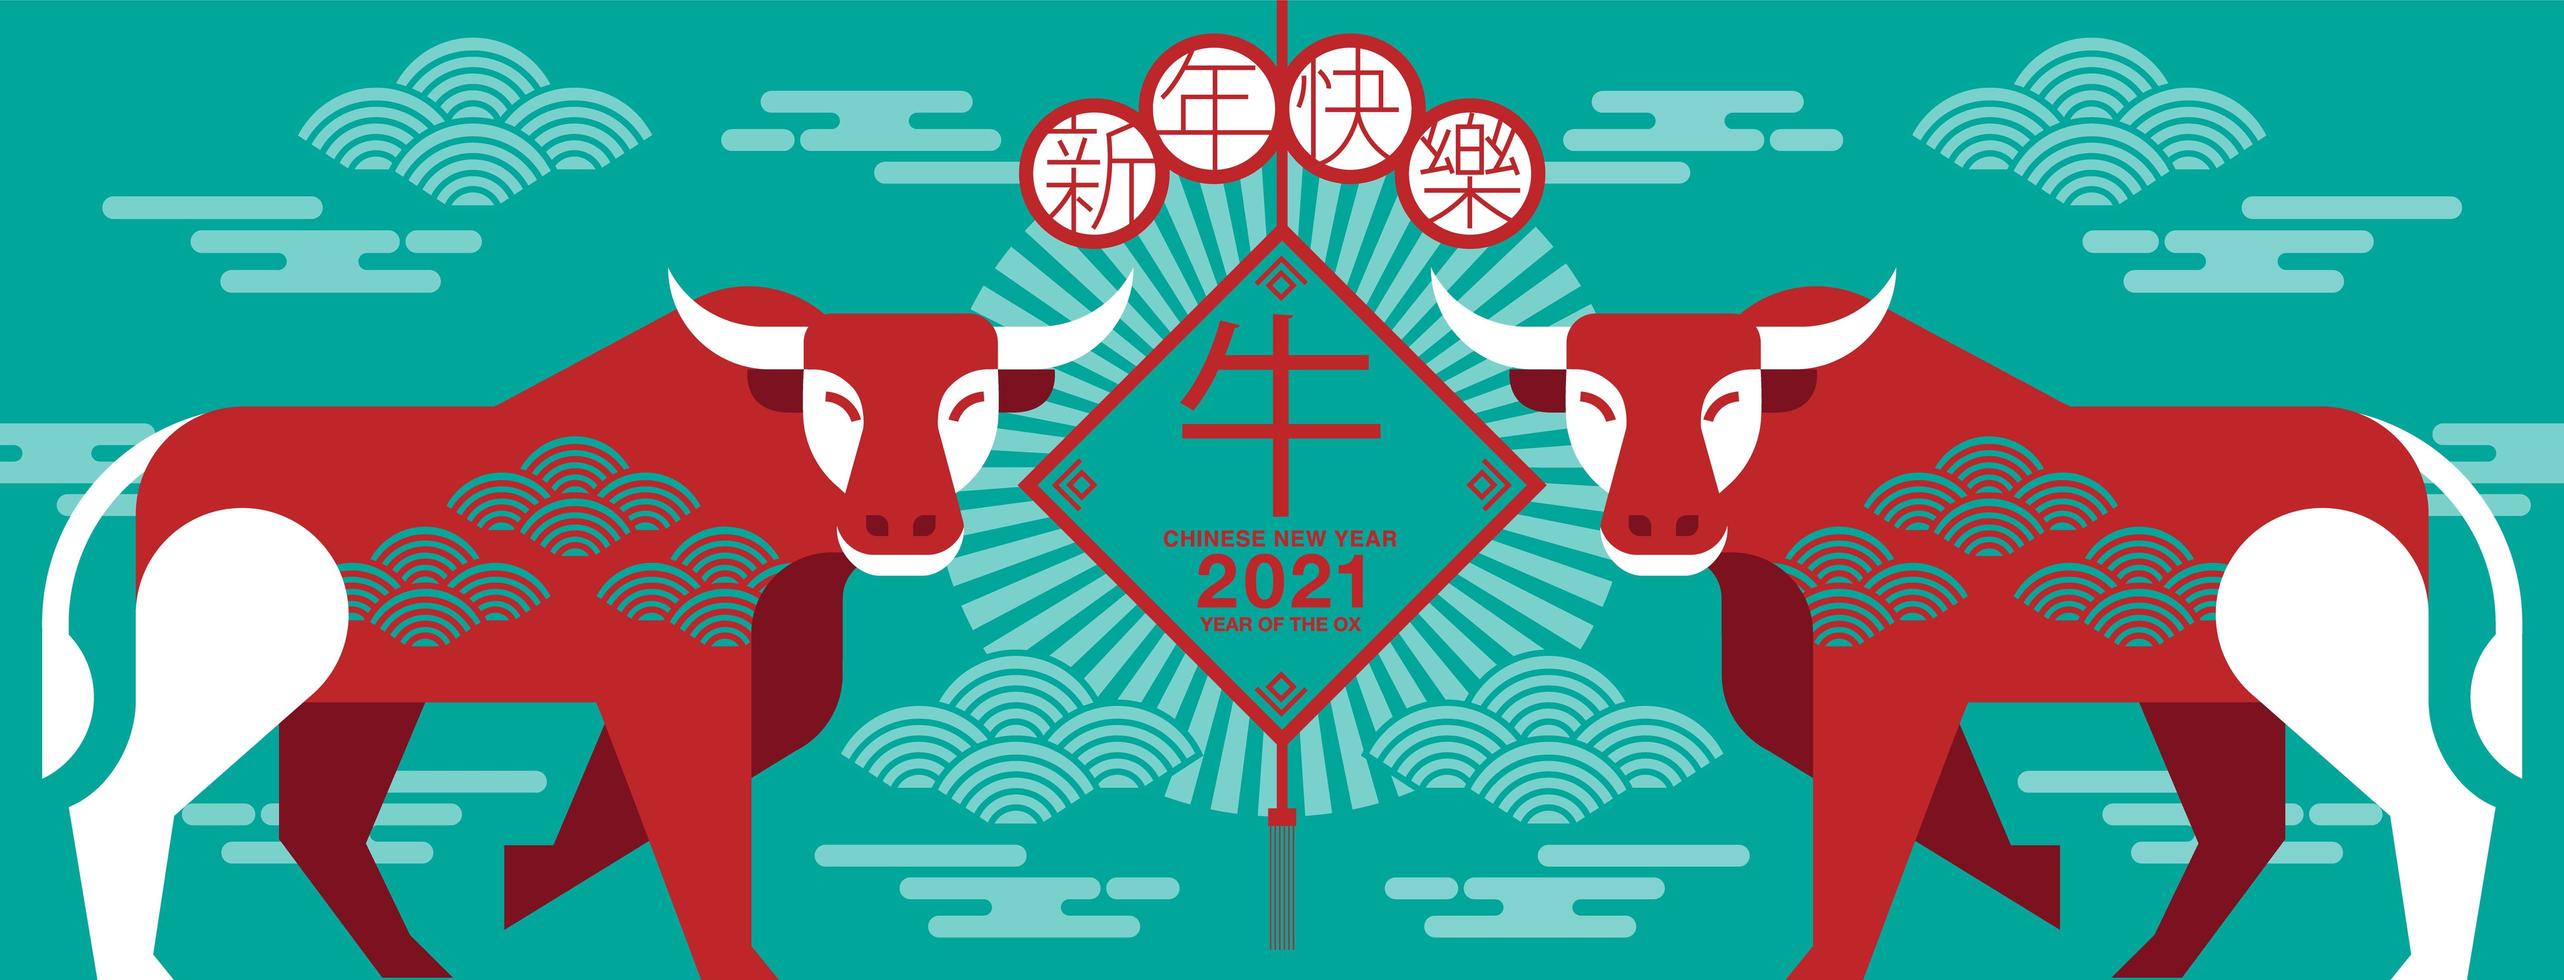 Chinese New Year, 2021 vector